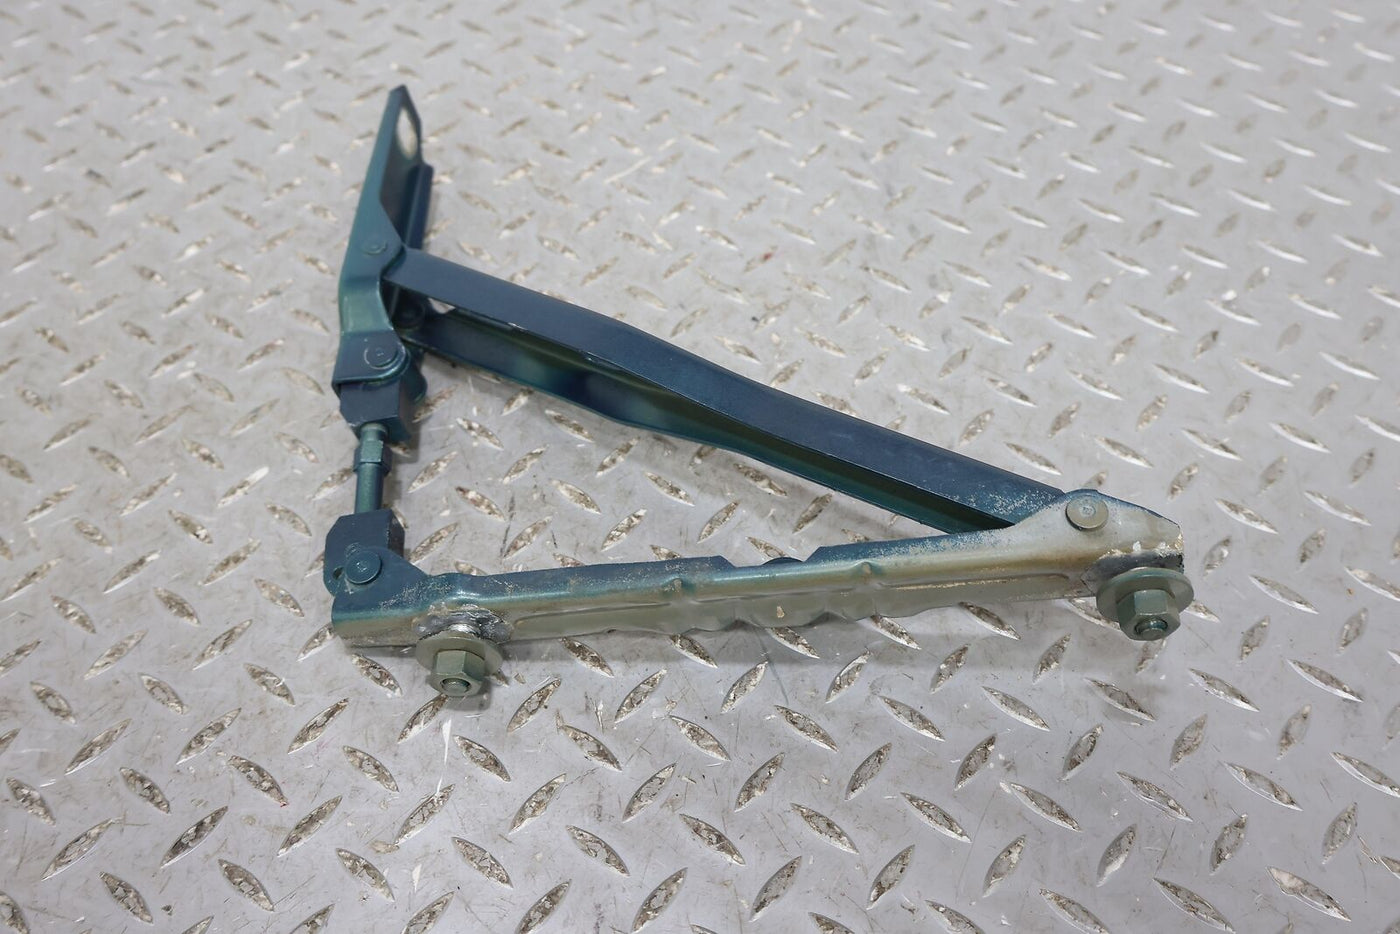 95-99 Buick Riviera Pair Left&Right Trunk Deck Lid Hinges Set of 2 (Light Green)